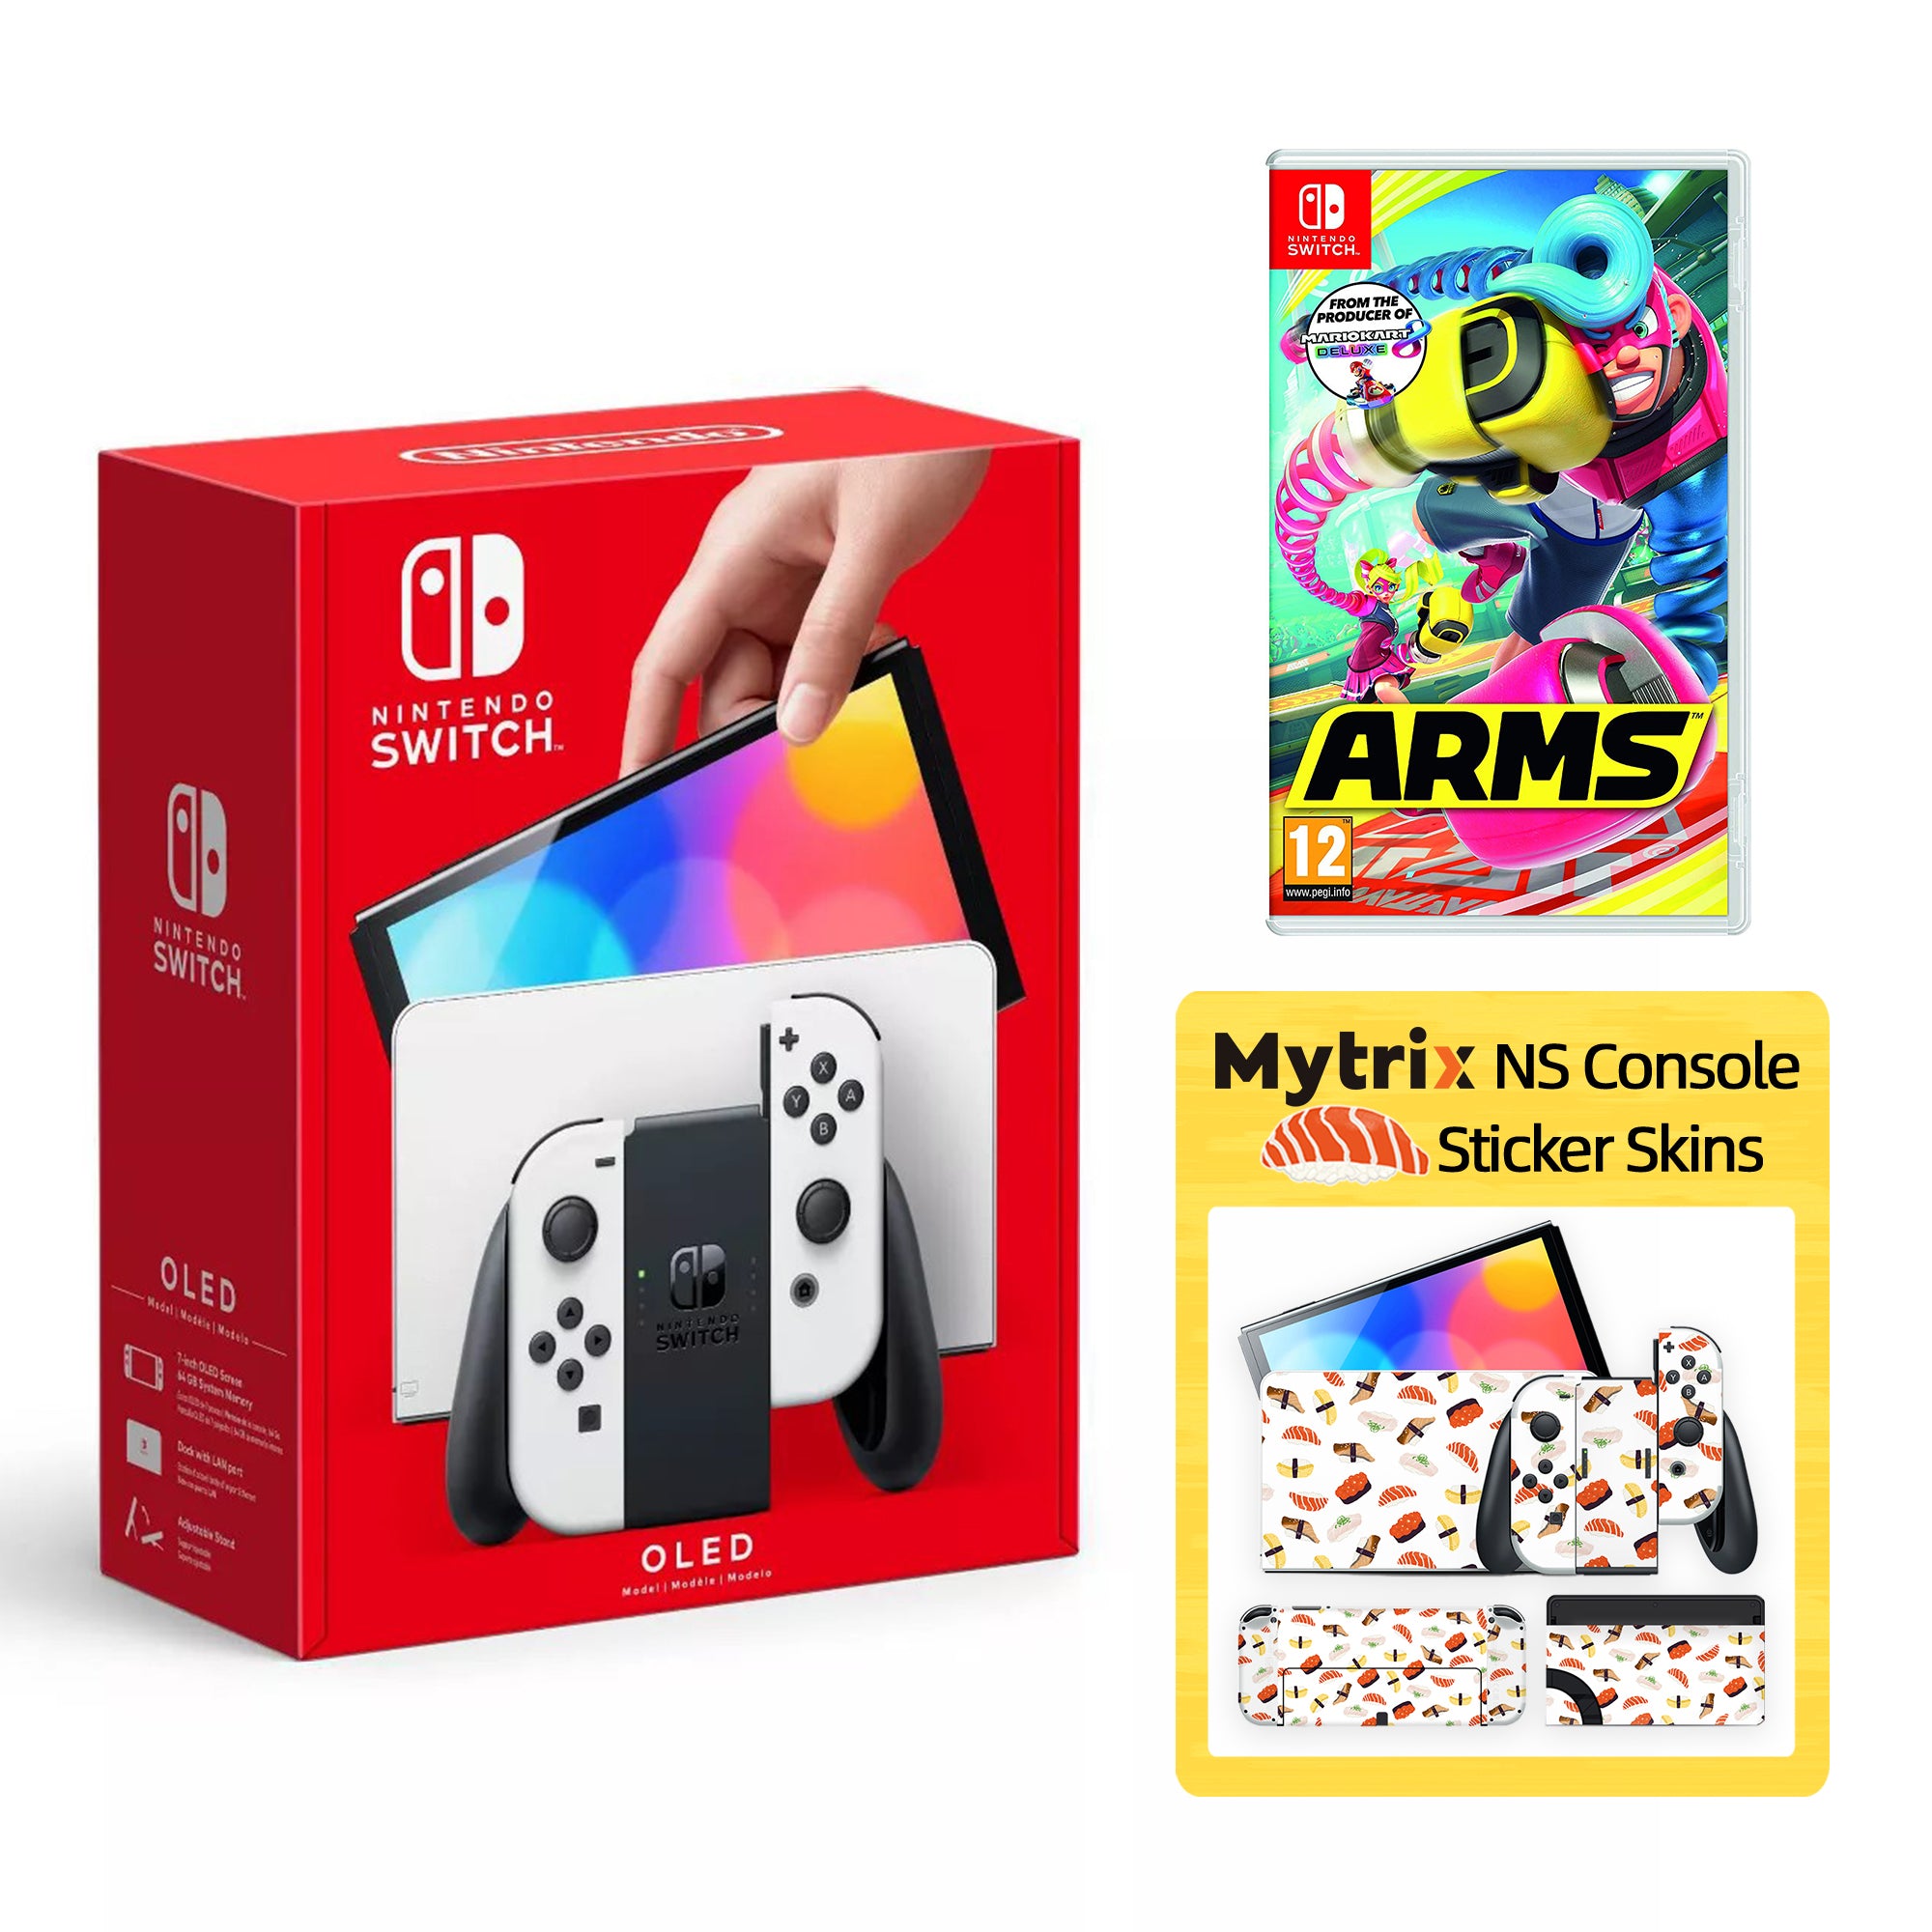 2022 New Nintendo Switch OLED Model Neon Red Blue with Arms and Mytrix Full Body Skin Sticker for NS OLED Console, Dock and Joycons - Sakura Pink